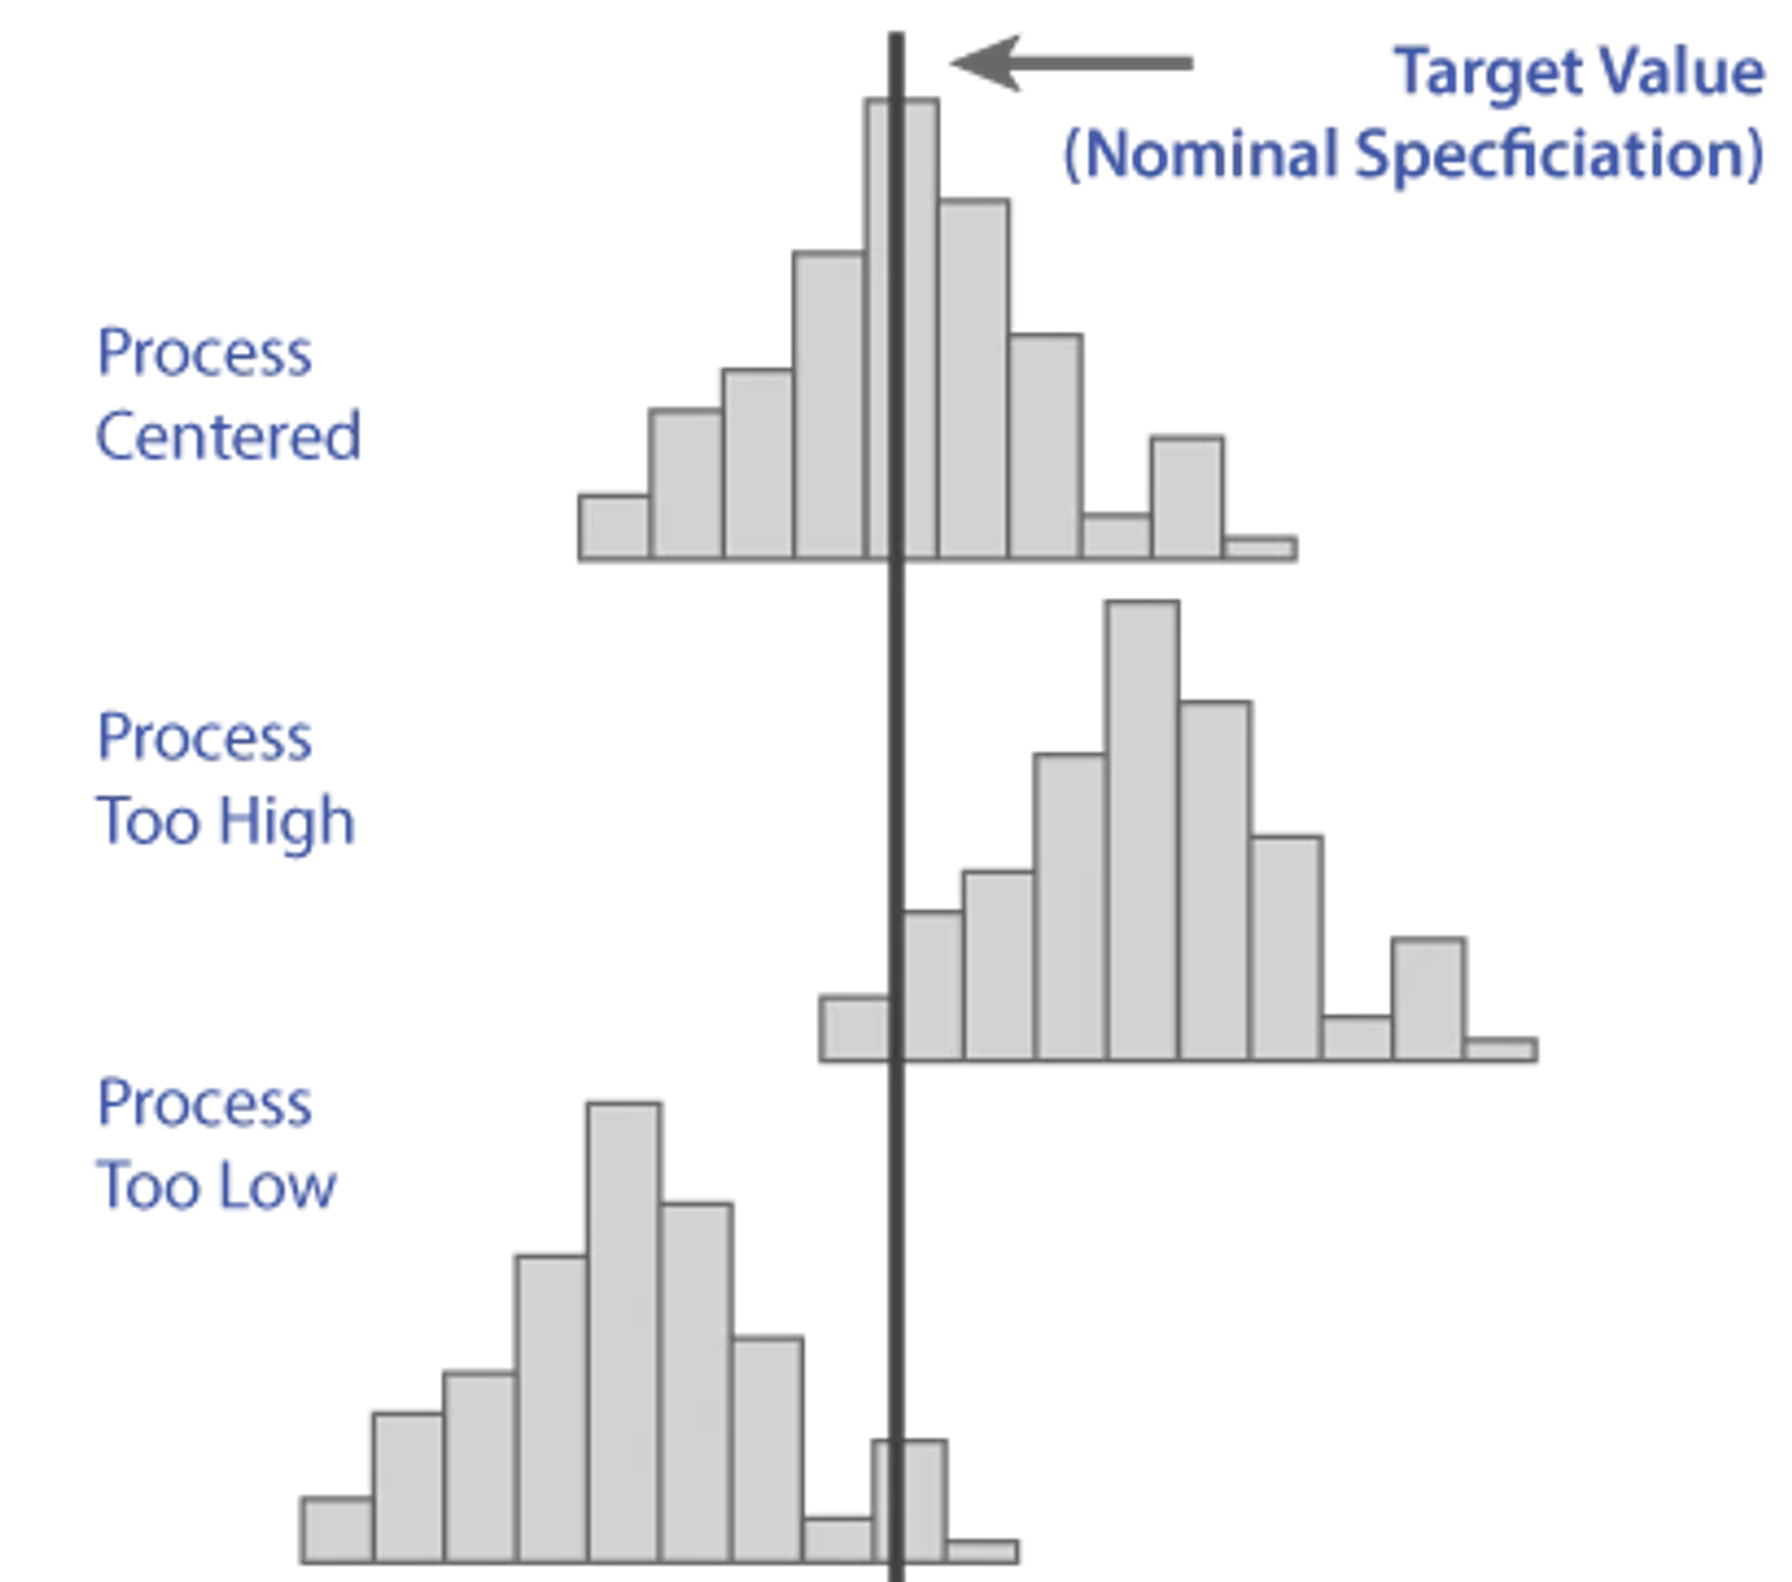 Process centered vs process too high vs process too low histograms